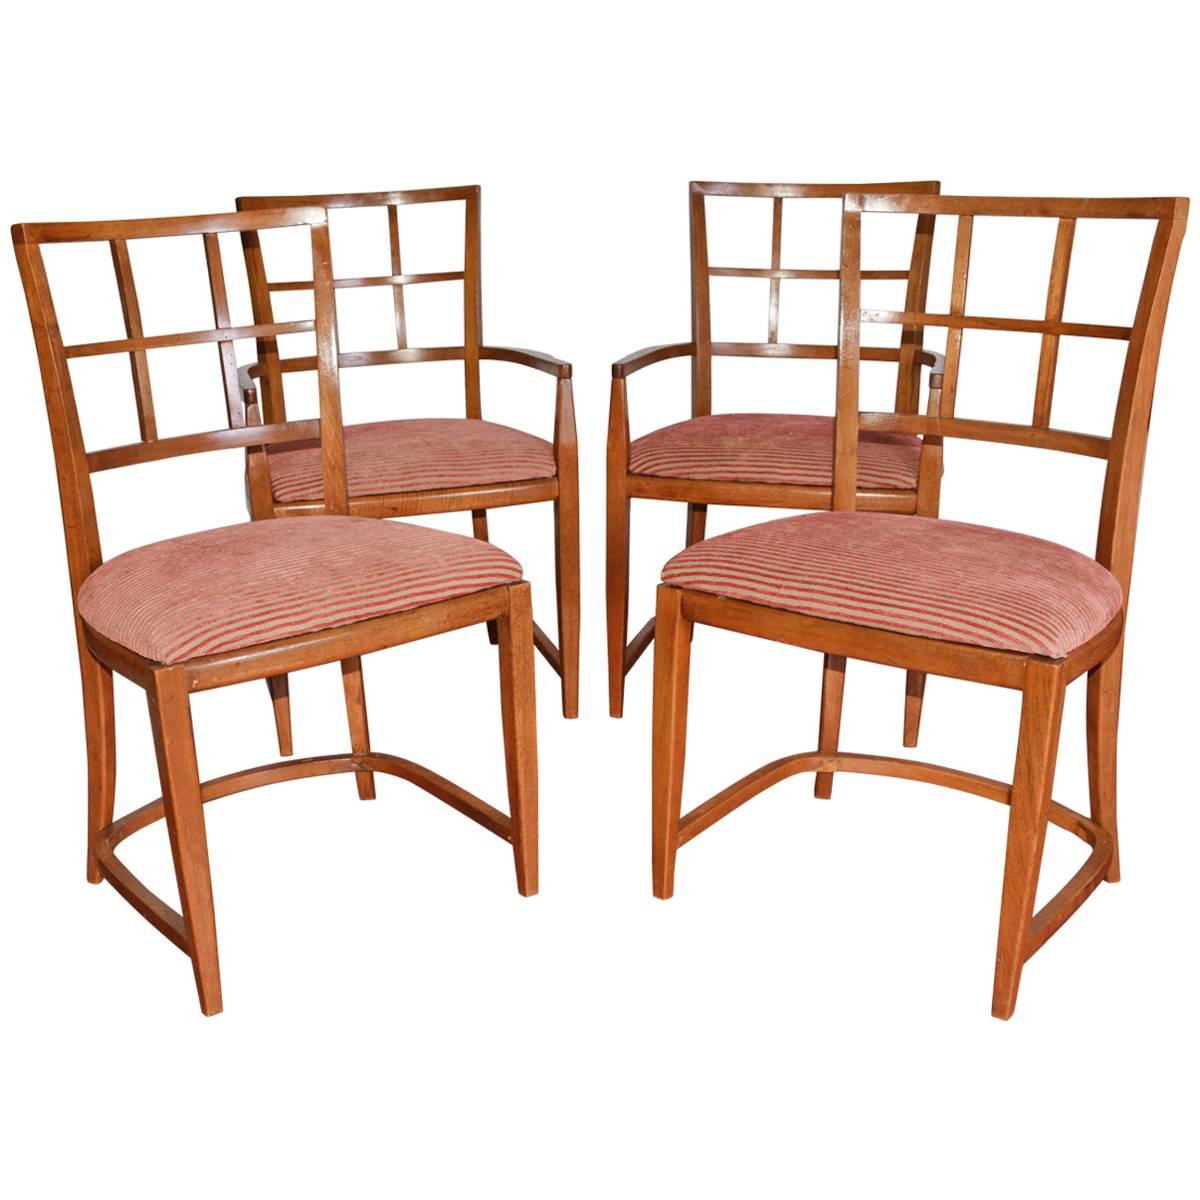 Four Art Deco Dining Chairs